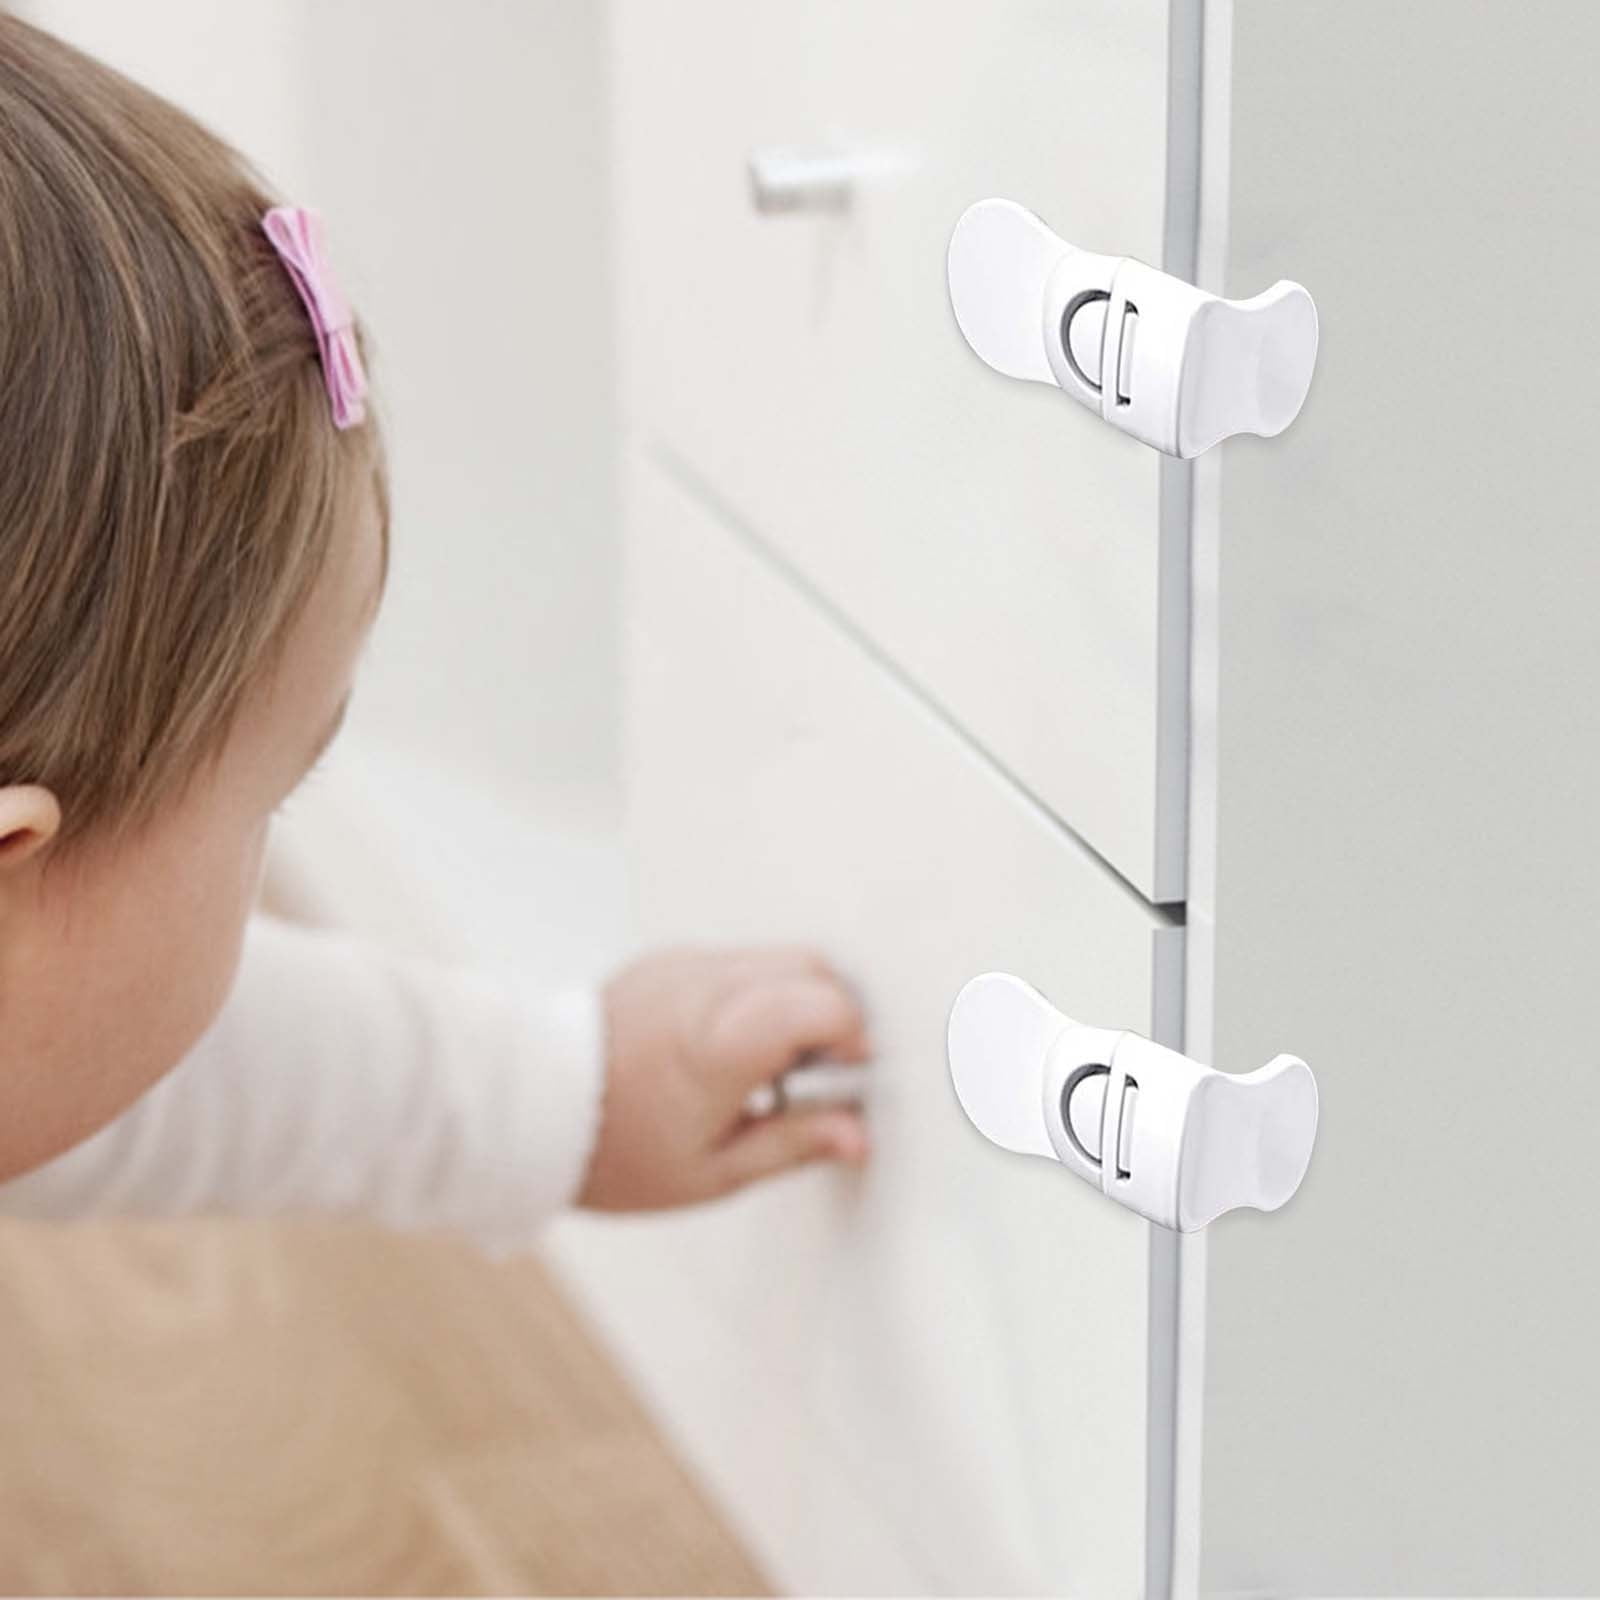 Dengmore Drawer Lock Children's Pinch Cabinet Door Lock Lock The Toilet And  Refrigerator Baby Safety Protection Articles Protective Lock 